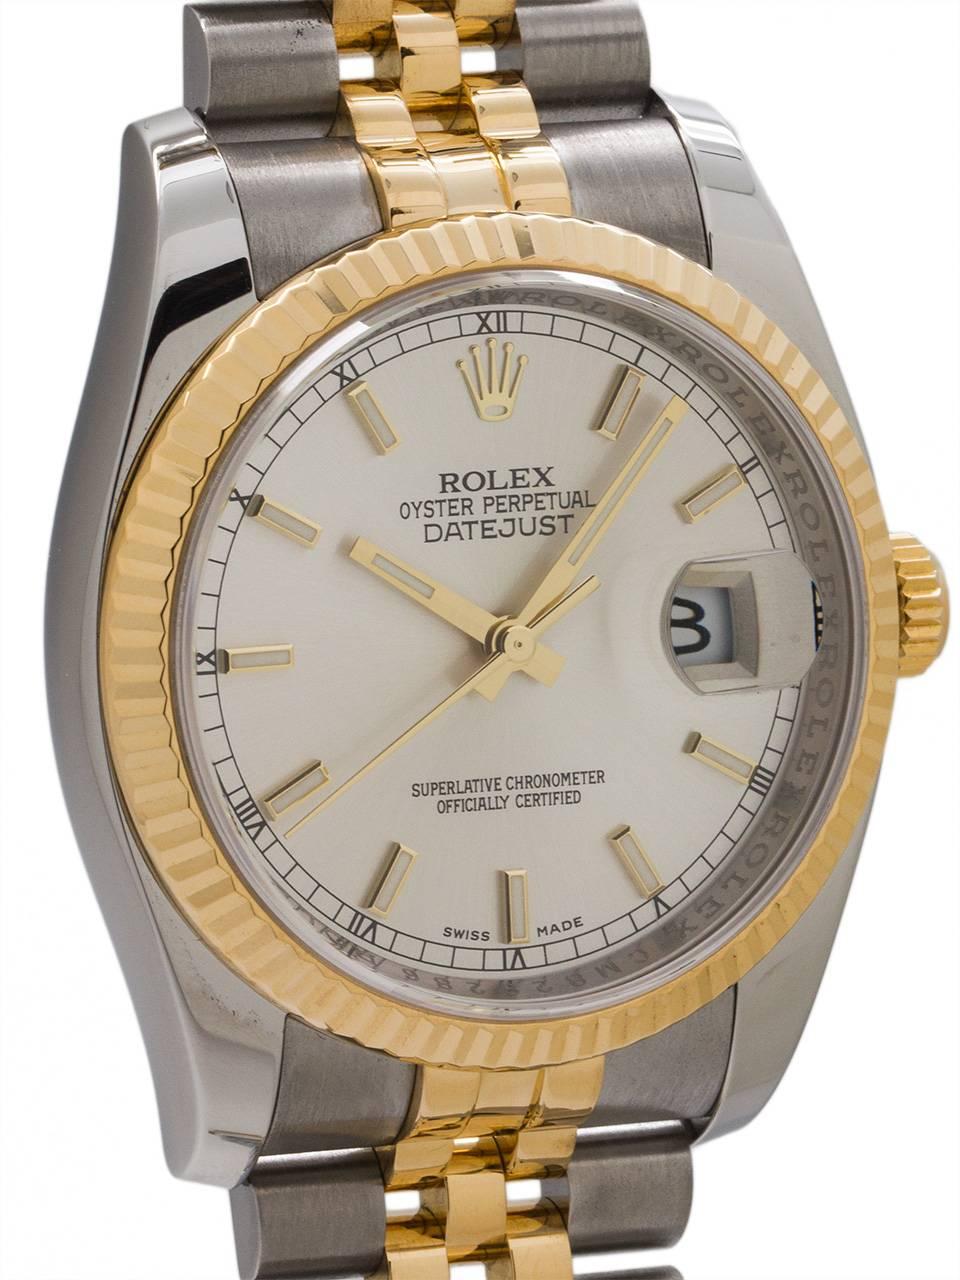 
Rolex SS/18K YG Datejust ref # 116203 random serial # with engraved inner bezel circa 2010+.  Featuring newer more robust design 36mm diameter case with smooth domed bezel, sapphire crystal, and silvered satin dial with large gold applied luminova